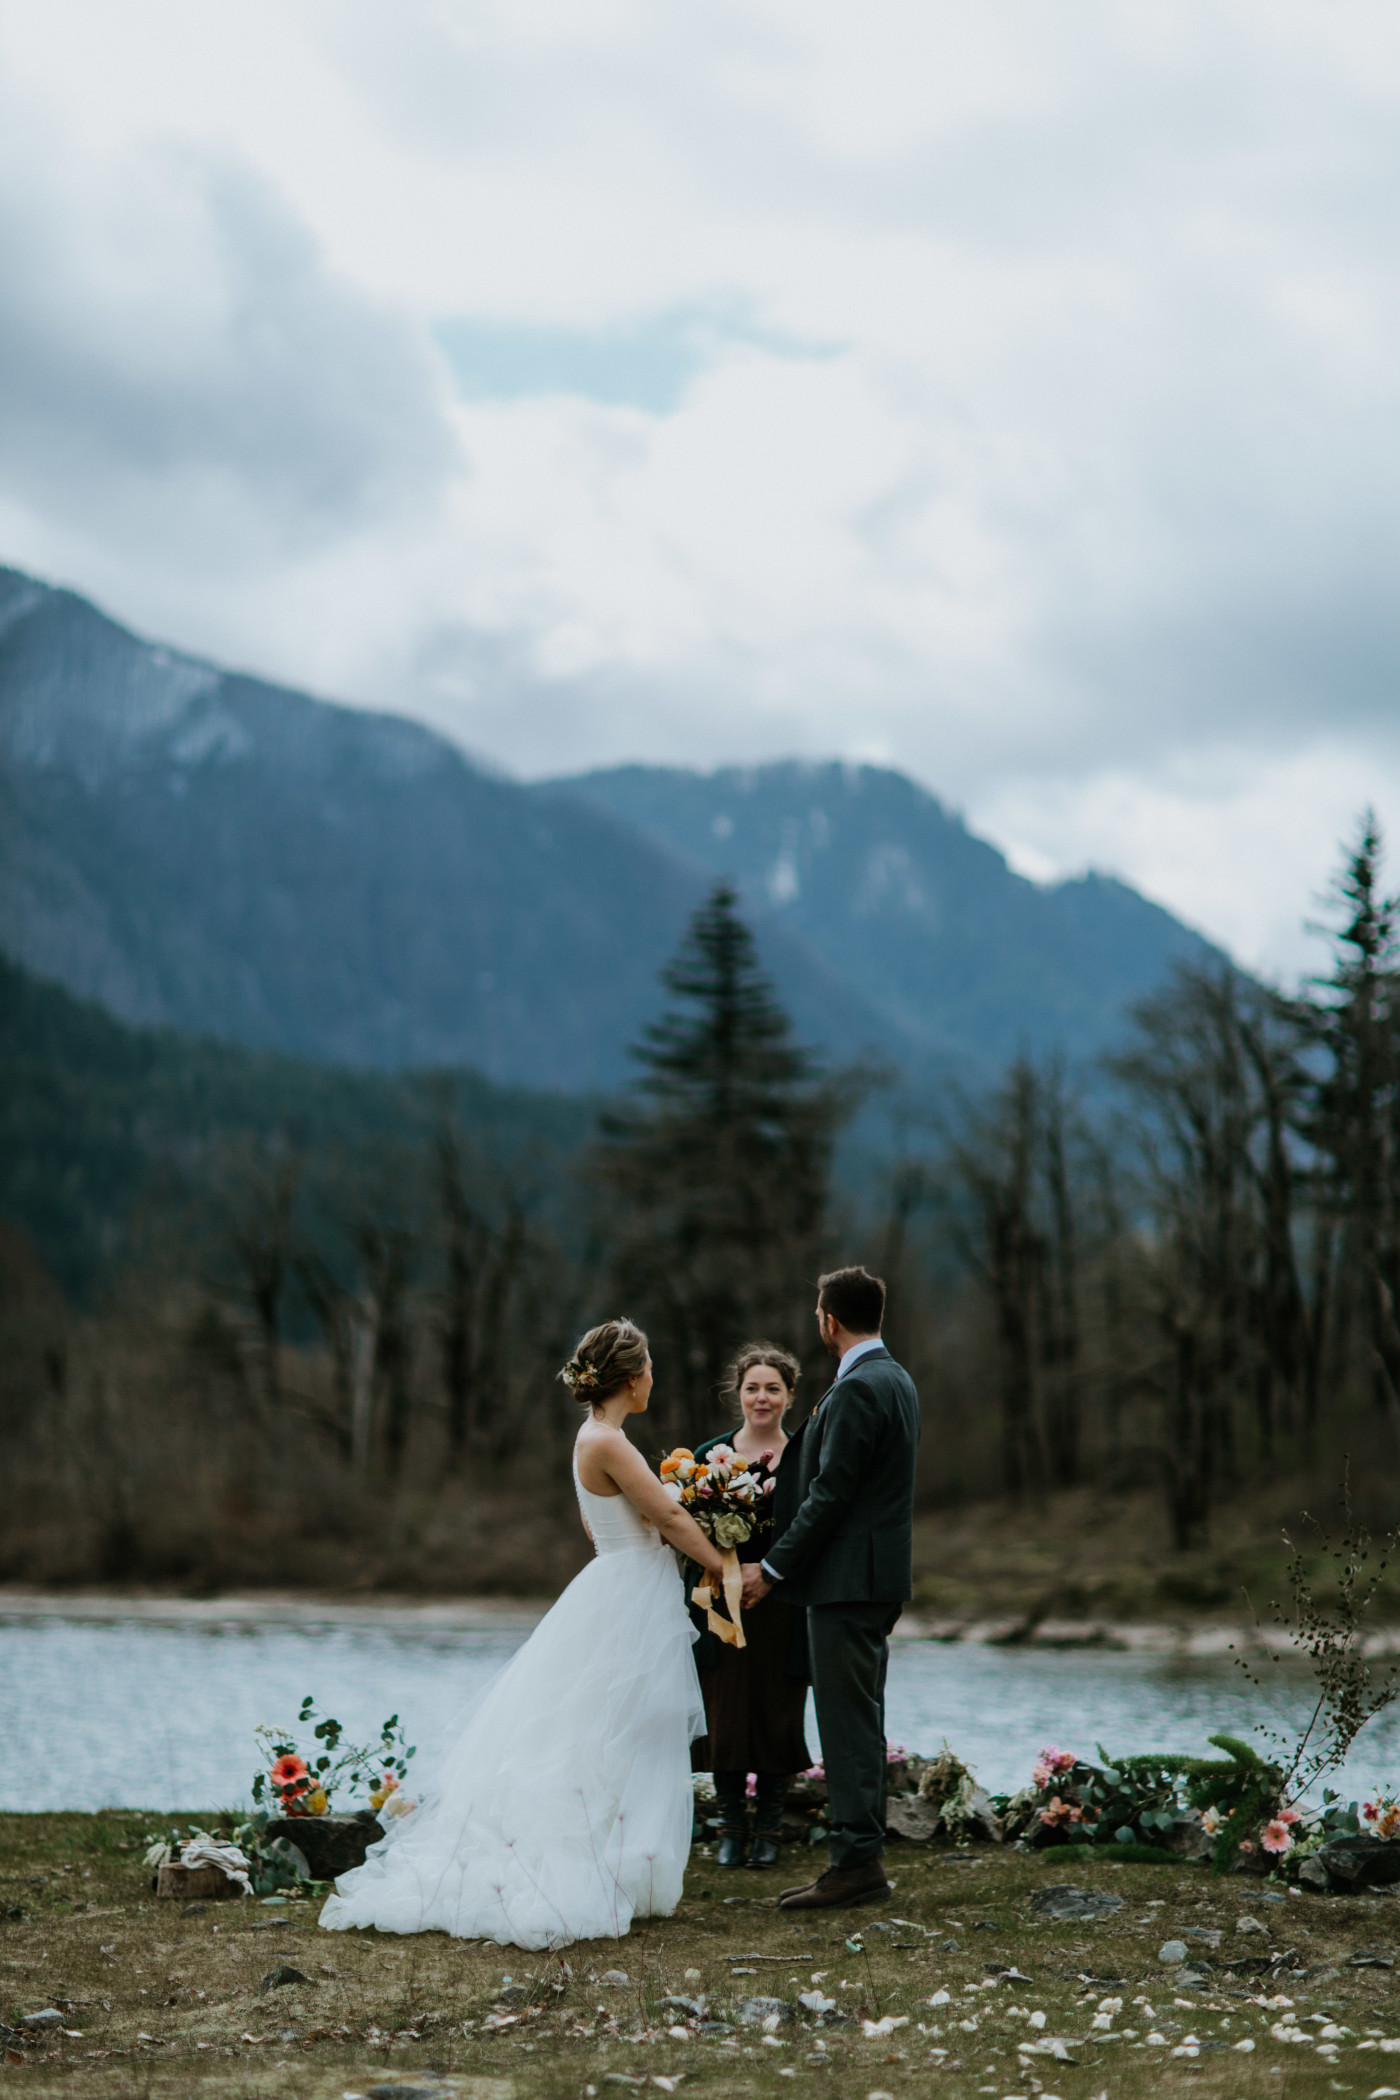 Allison and Lennie smile at their officiant. Elopement photography at Columbia River Gorge by Sienna Plus Josh.